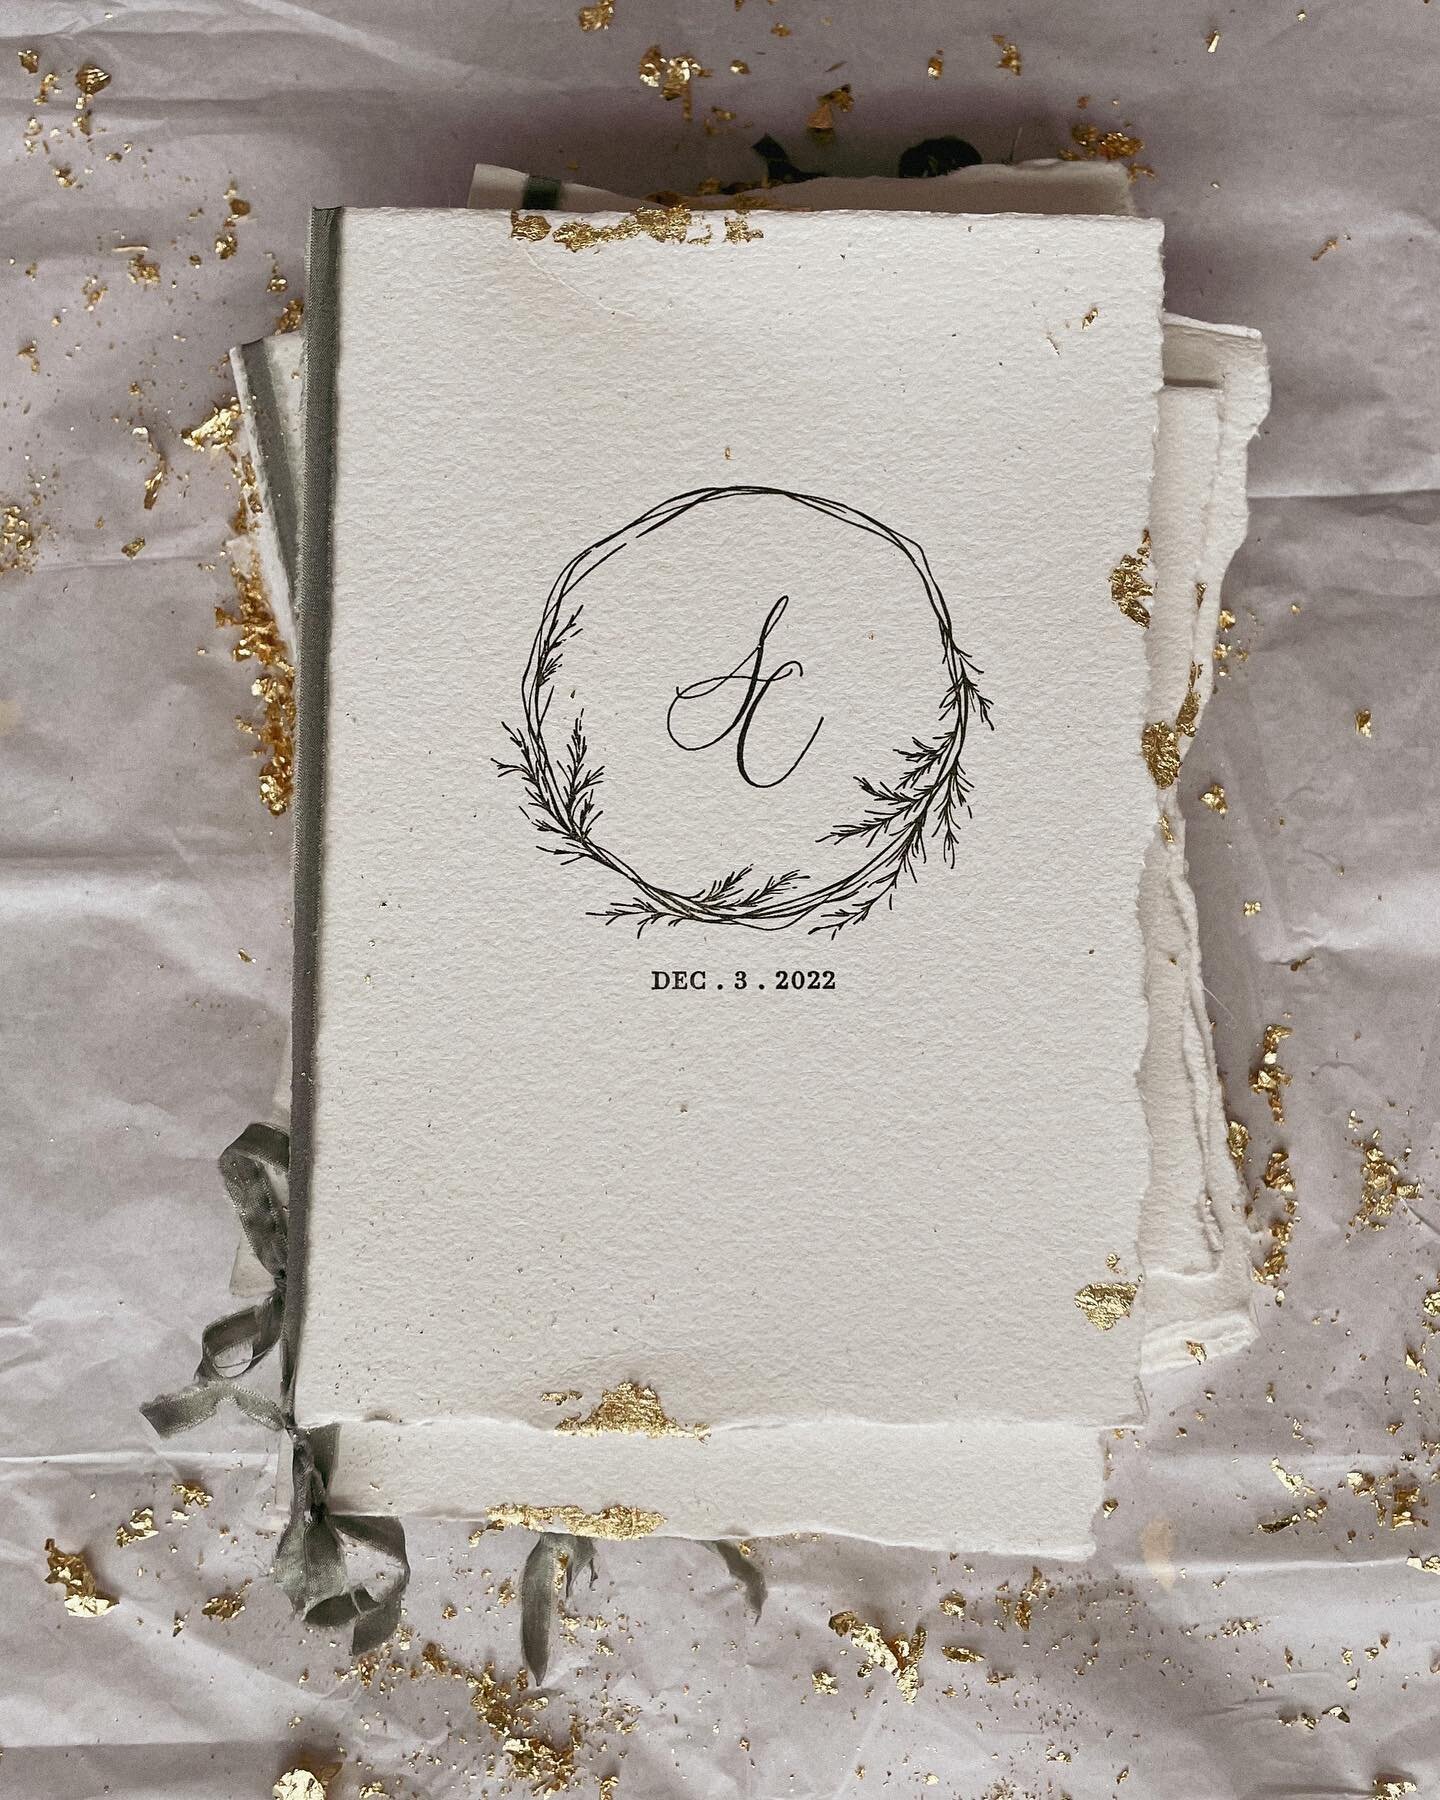 Last weekend my sister tied the knot! I was honoured to be part of her special day by creating the day-of stationery.

Detail of this program, featuring letterpress printing, gold leaf, and silk twine. 
.
.
.
.
.
 #weddingpaper #weddinginvitations #w